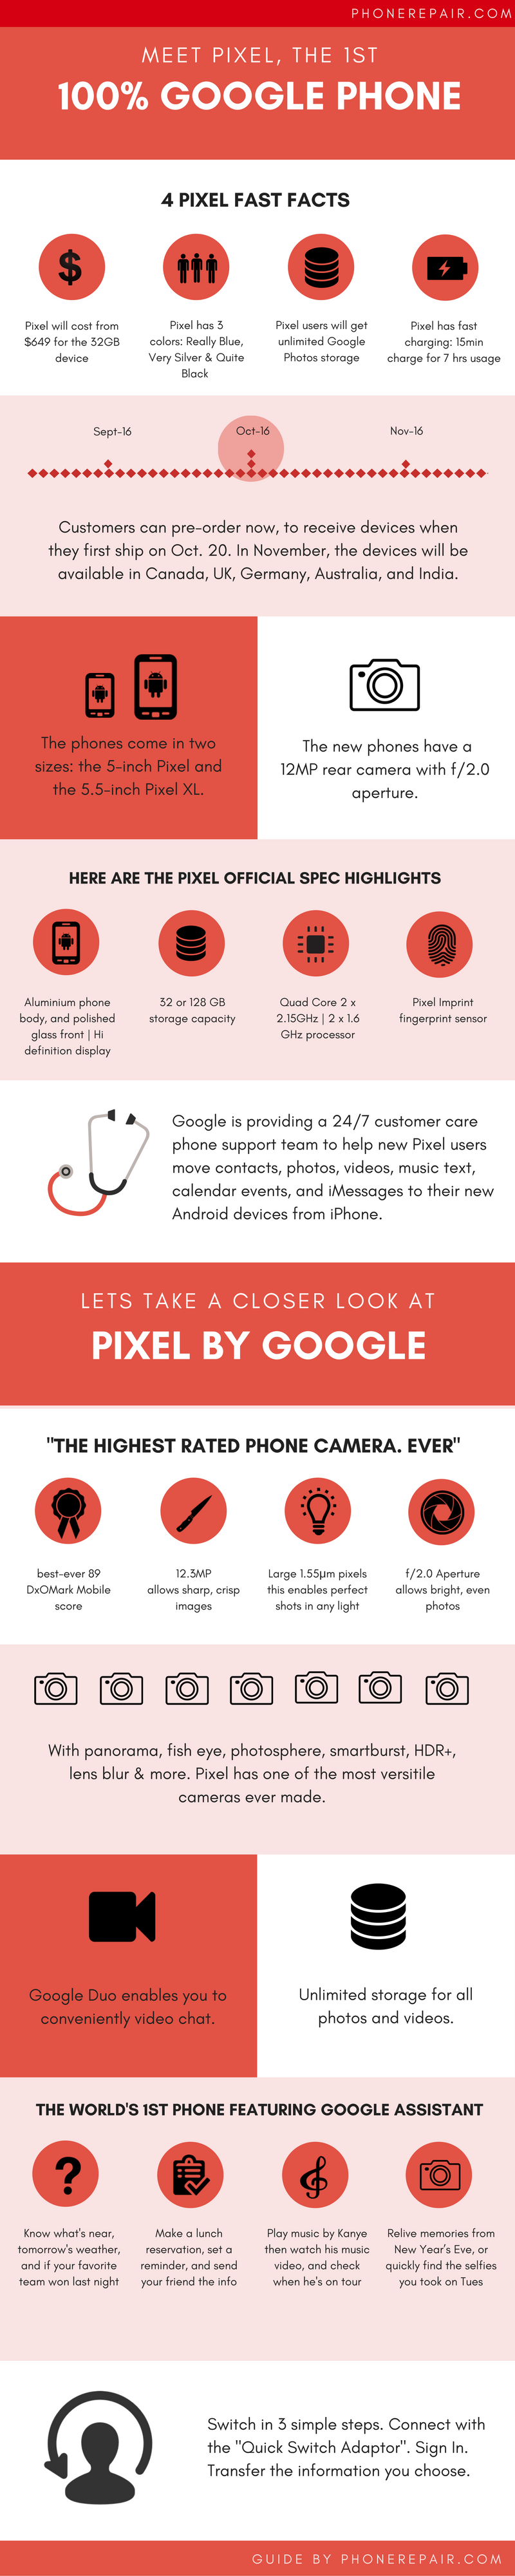 Everything You Need To Know About Google's Pixel Phone